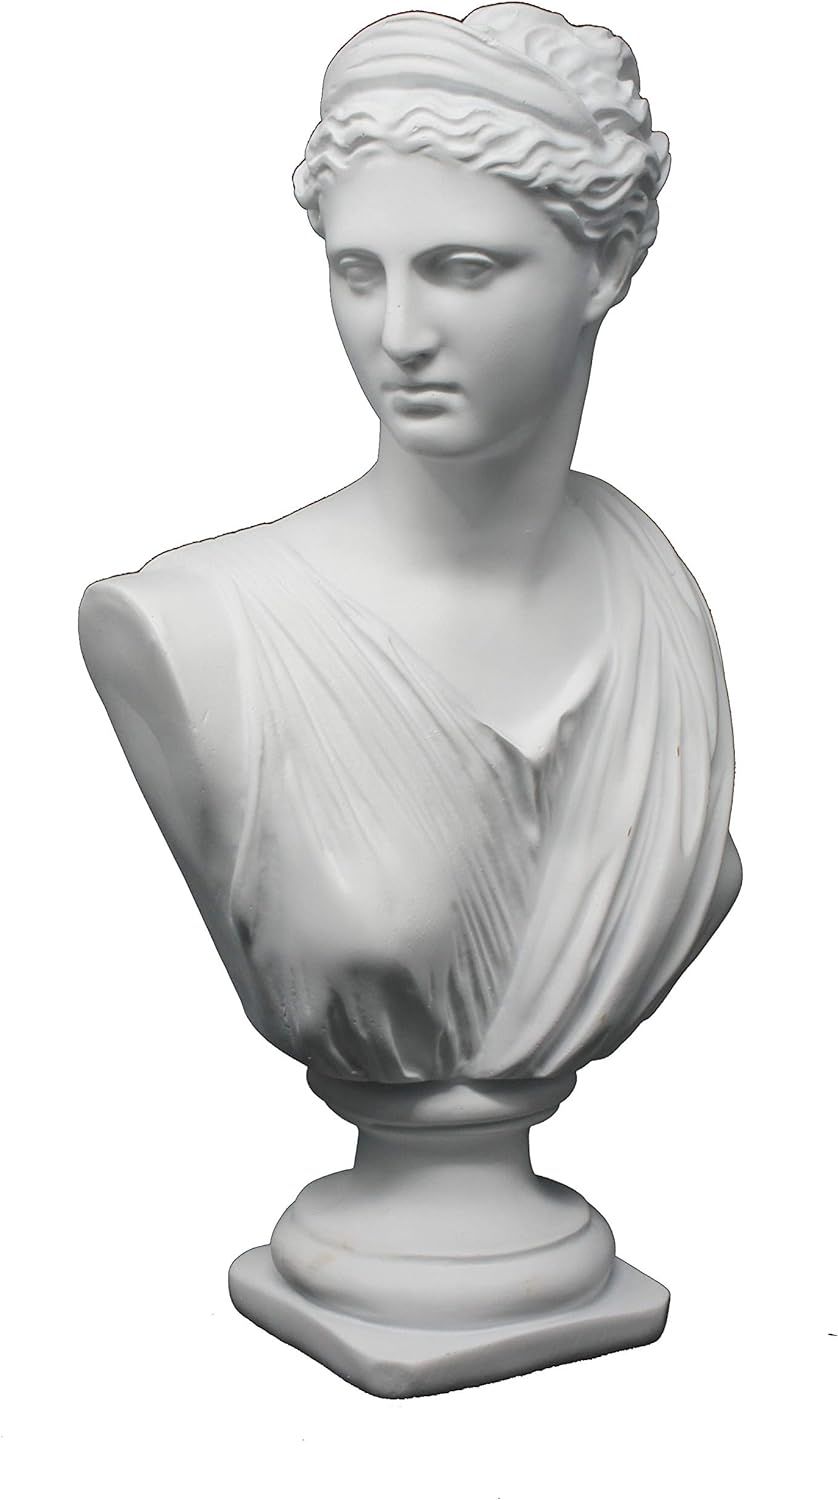 Good Buy Gifts Diana The Huntress Bust - Roman God Statue - 1Ft Height - White/Green Color (White... | Amazon (US)